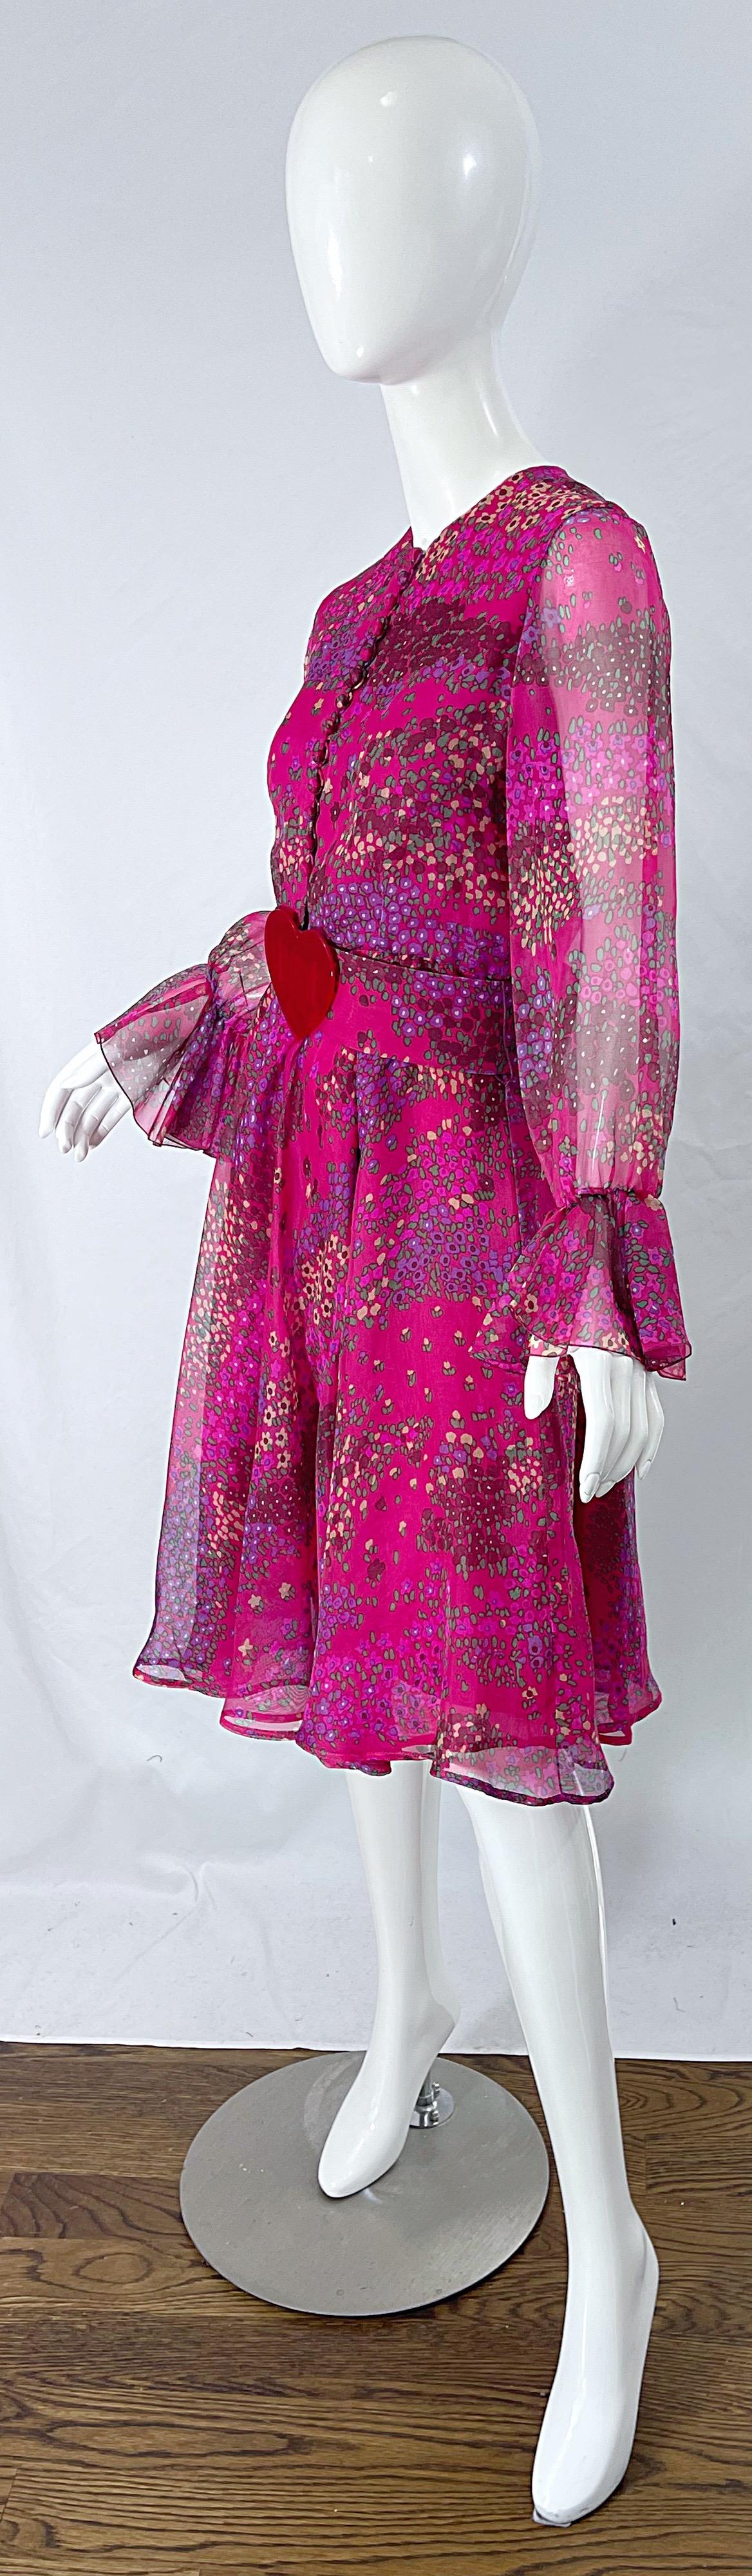 1960s Oscar de la Renta Pink Heart and Flower Print Vintage 60s Silk Dress In Excellent Condition For Sale In San Diego, CA